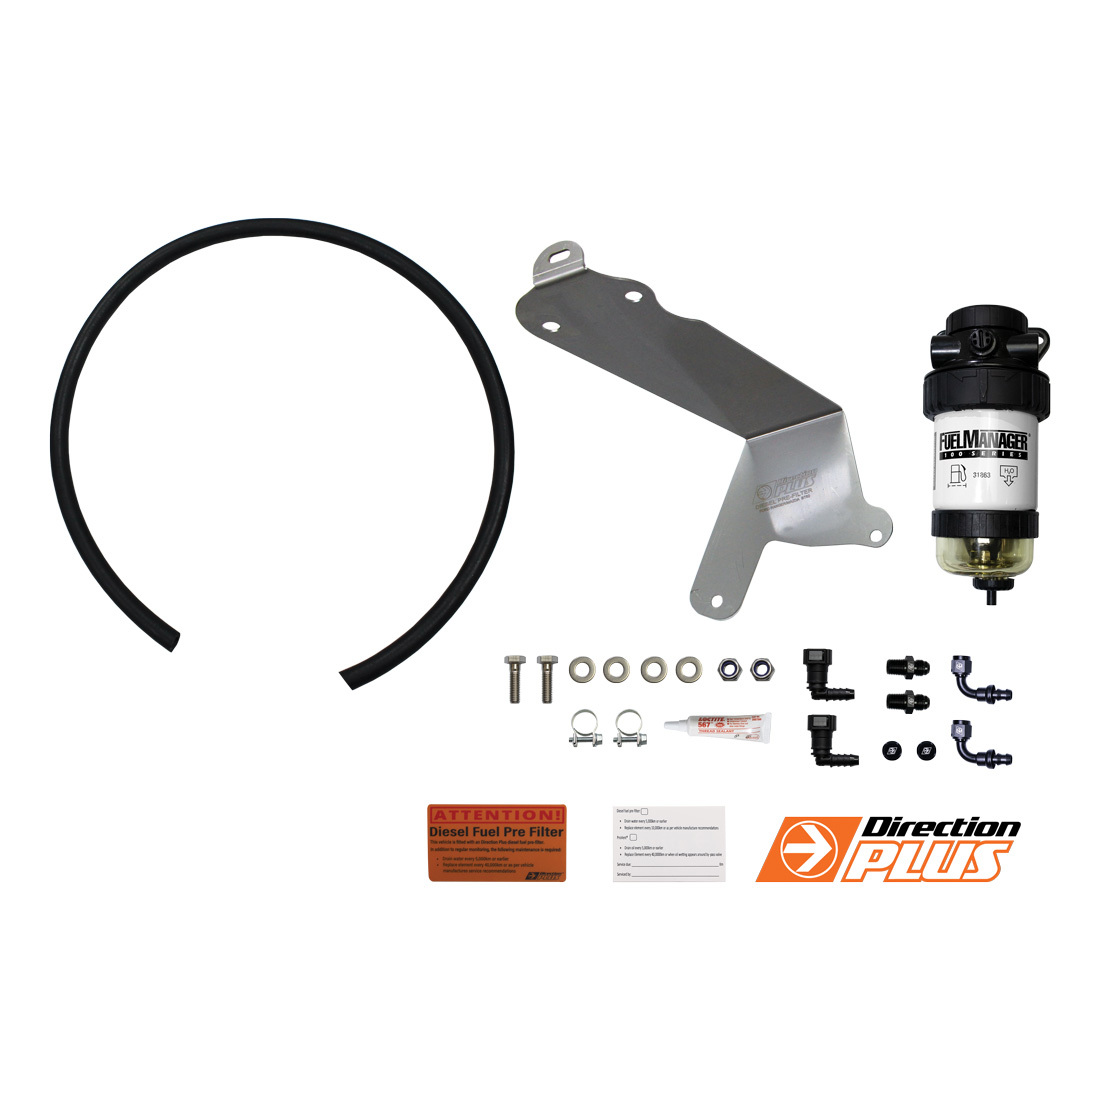 Fuel Manager Pre-Filter Kit For Ford Ranger/Mazda BT-50 P4AT & P5AT 2011 - 2021